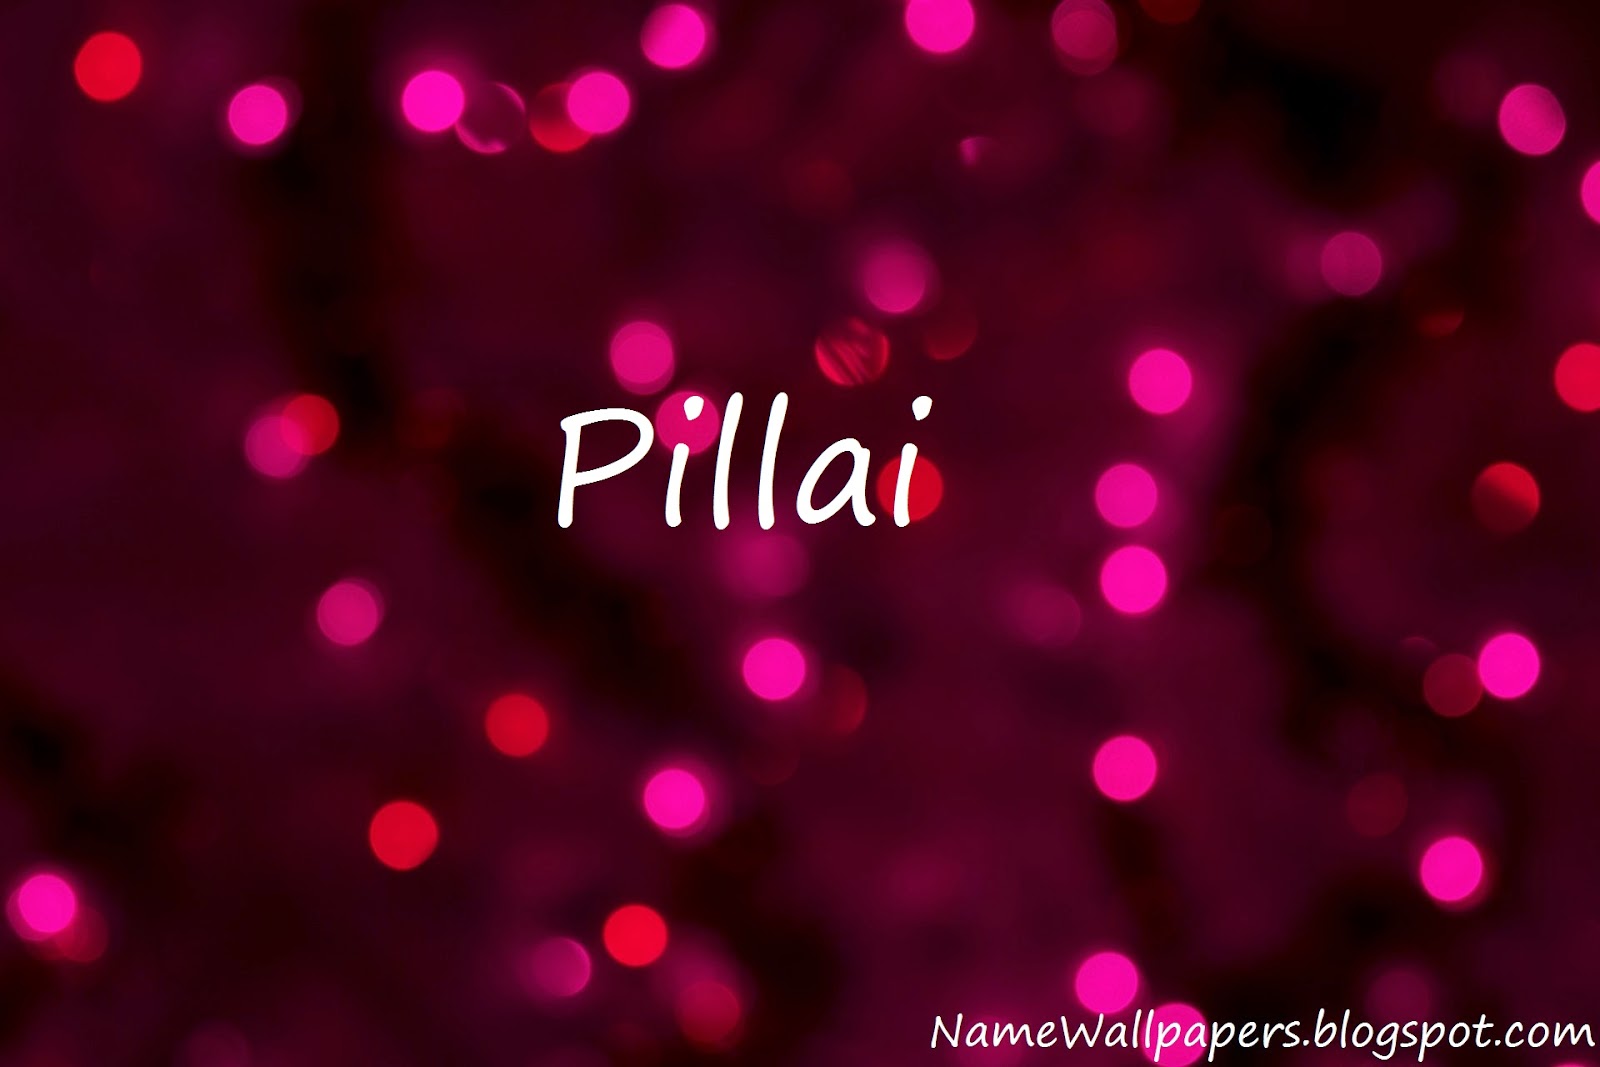 Pillai Name Wallpapers Pillai ~ Name Wallpaper Urdu Name Meaning Name  Images Logo Signature